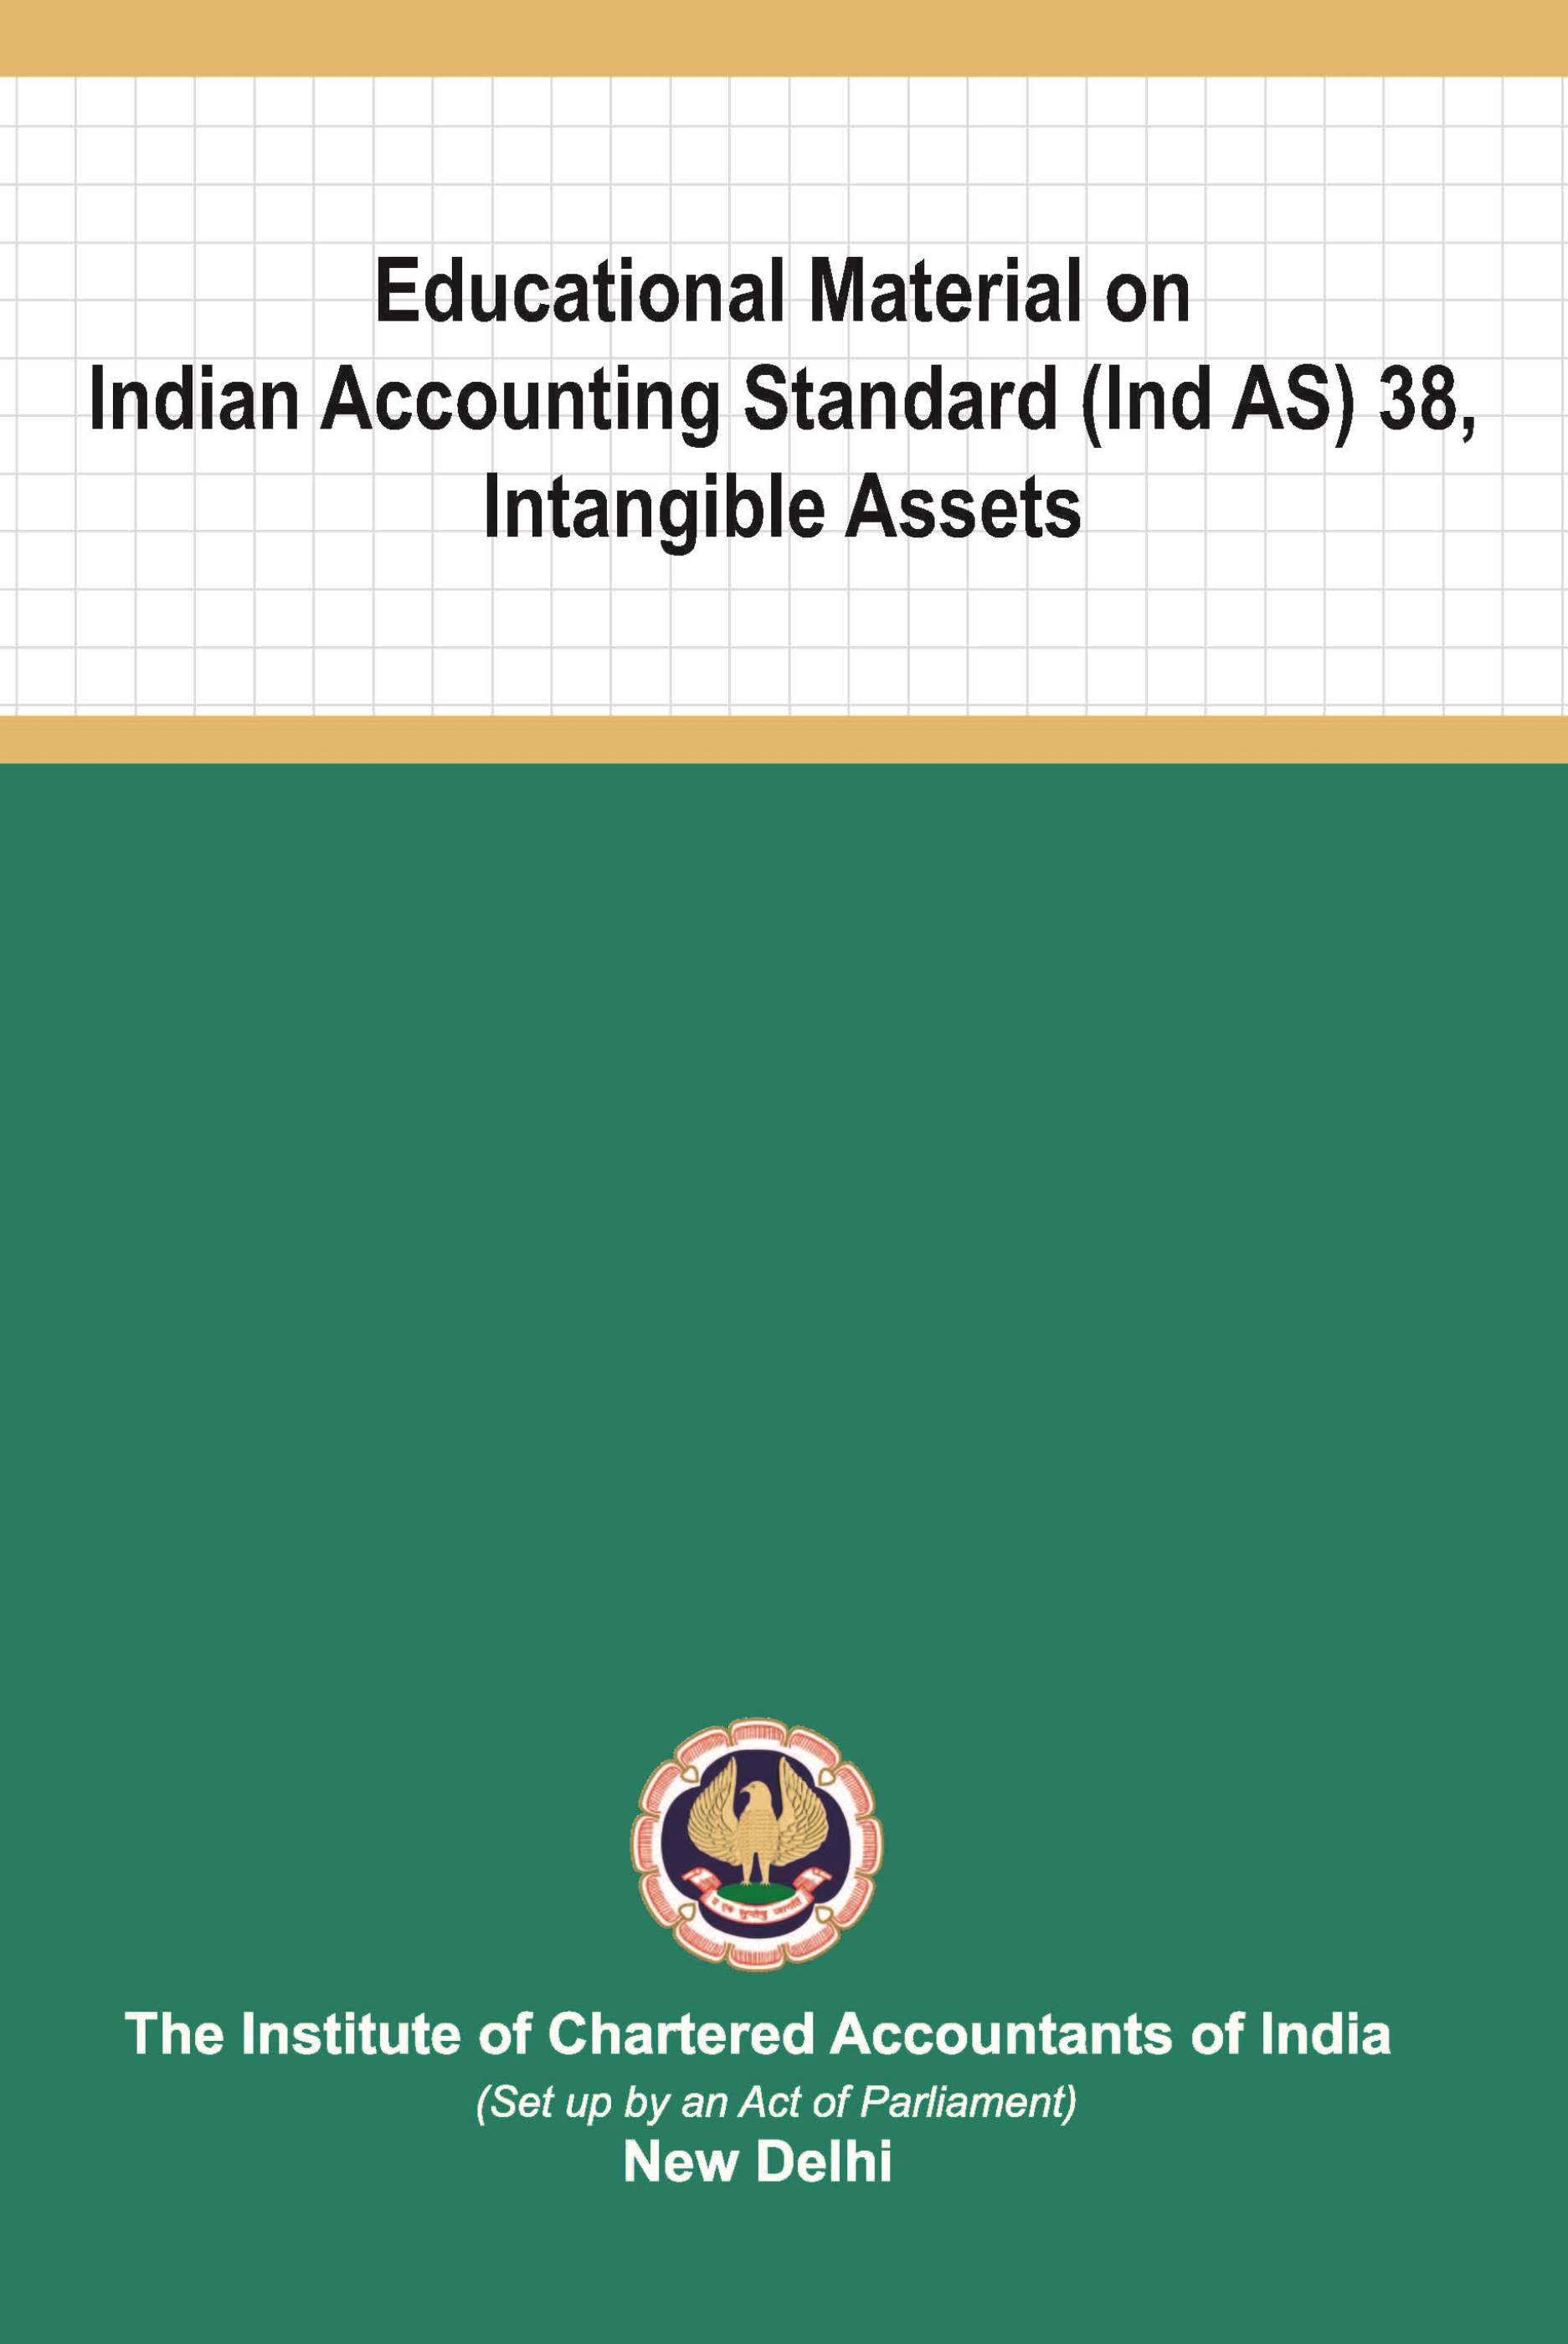 Educational Material on Indian Accounting Standard (Ind AS 38) Intangible Assets (July, 2020)